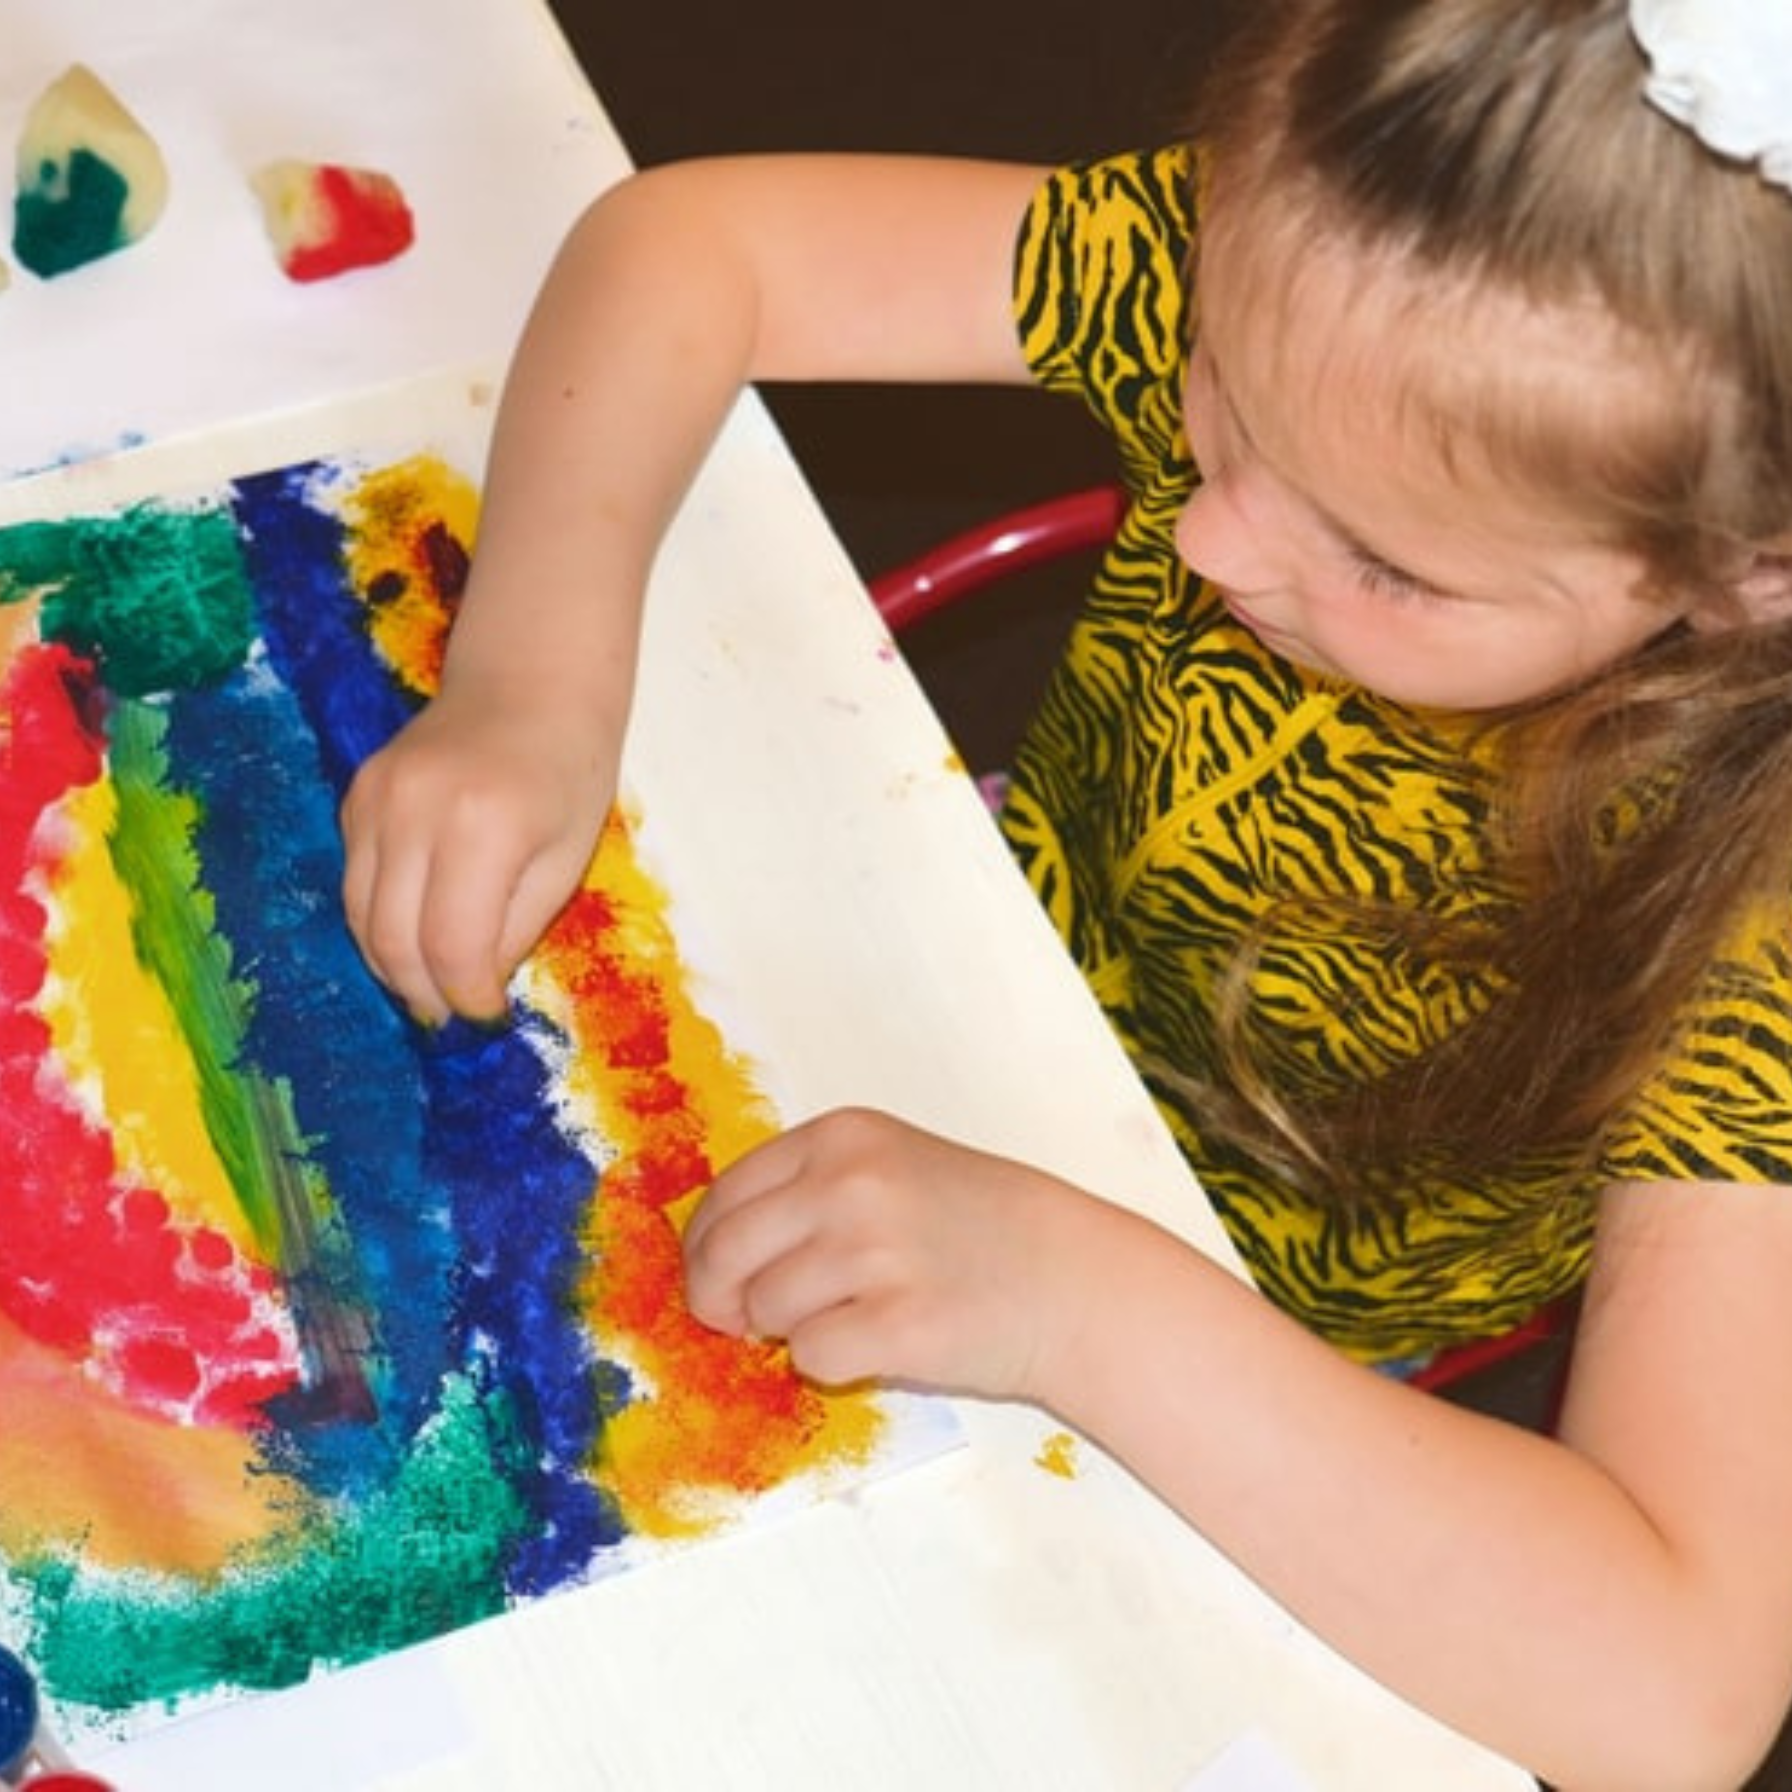 What Are the Benefits Of Arts And Crafts For Kids